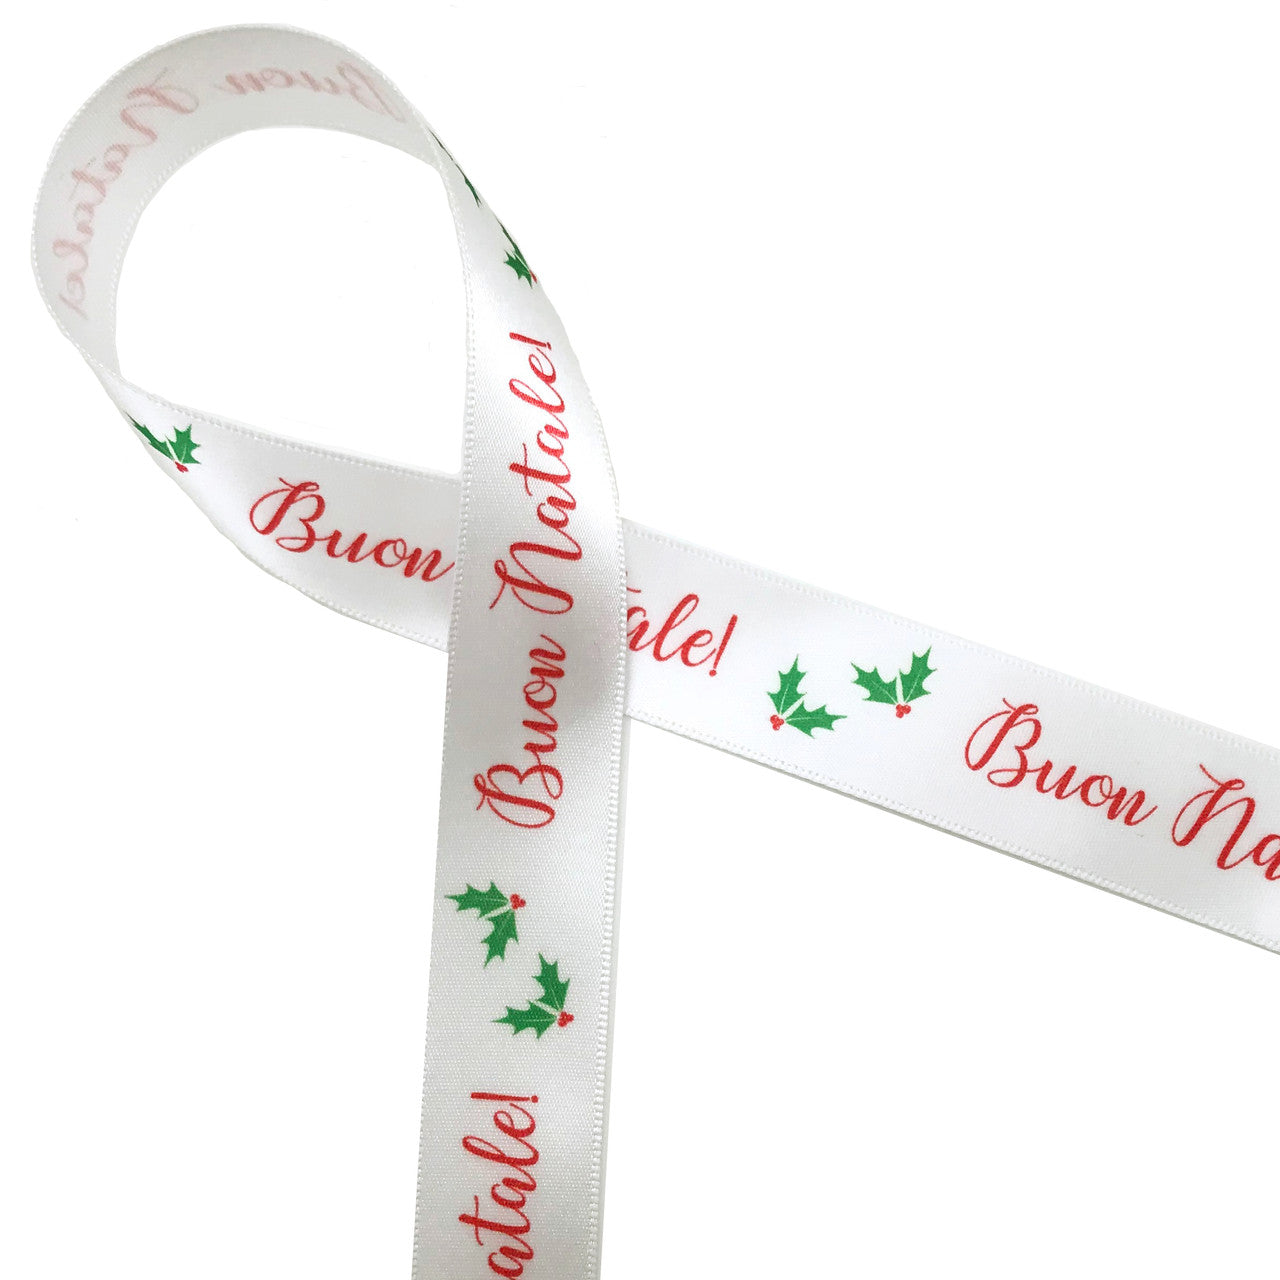 Buon Natale! is Merry Christmas in Italian! This fun ribbon is printed in red with green  holly leaves and red berries on 7/8" white single face satin.  Make this ribbon part of your Holiday celebration!